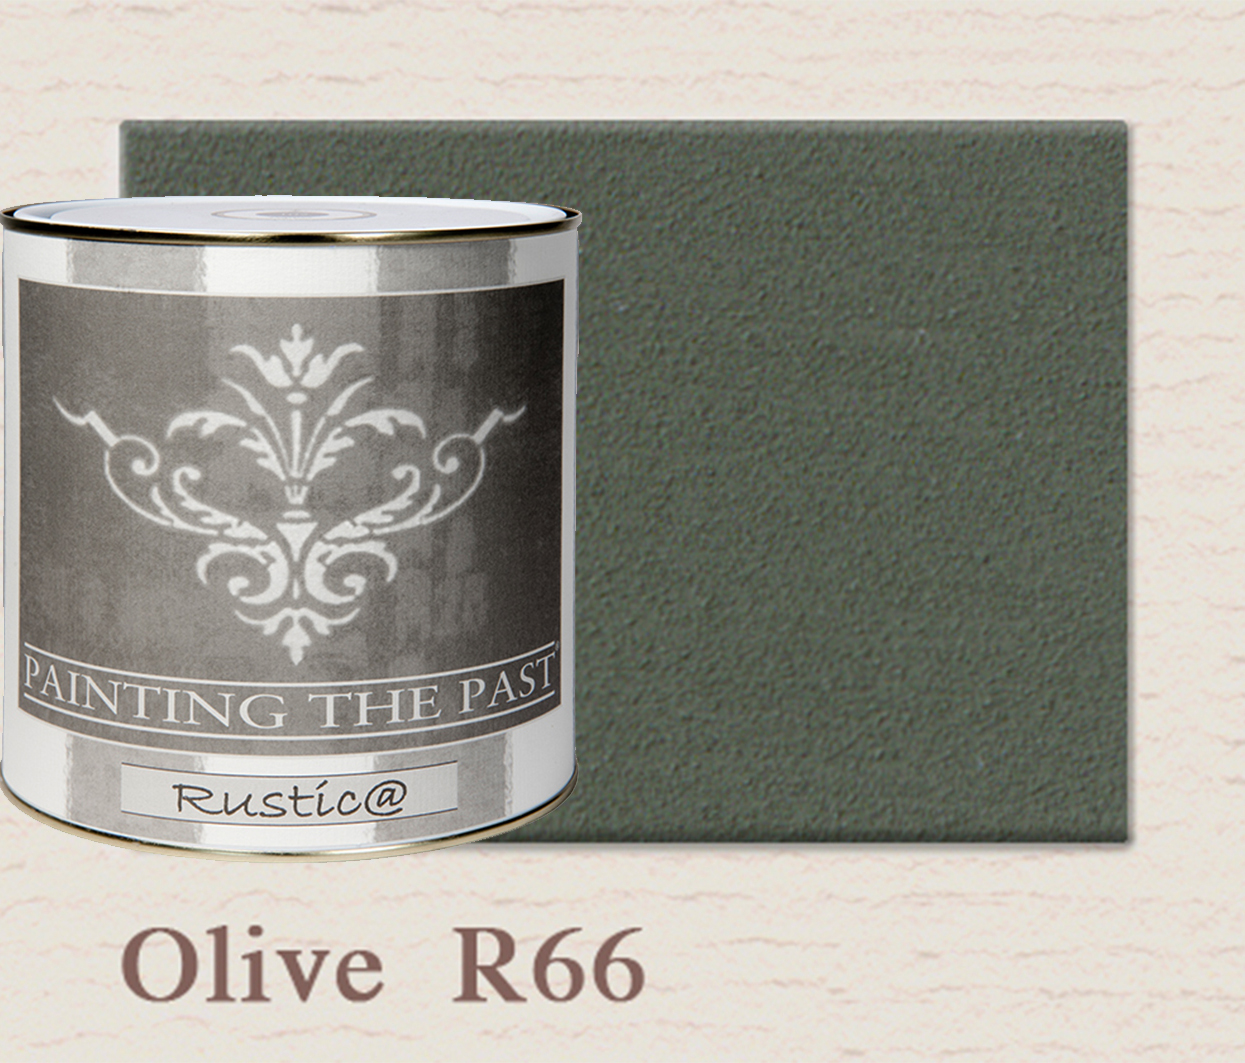 Painting The Past Rustica Olive